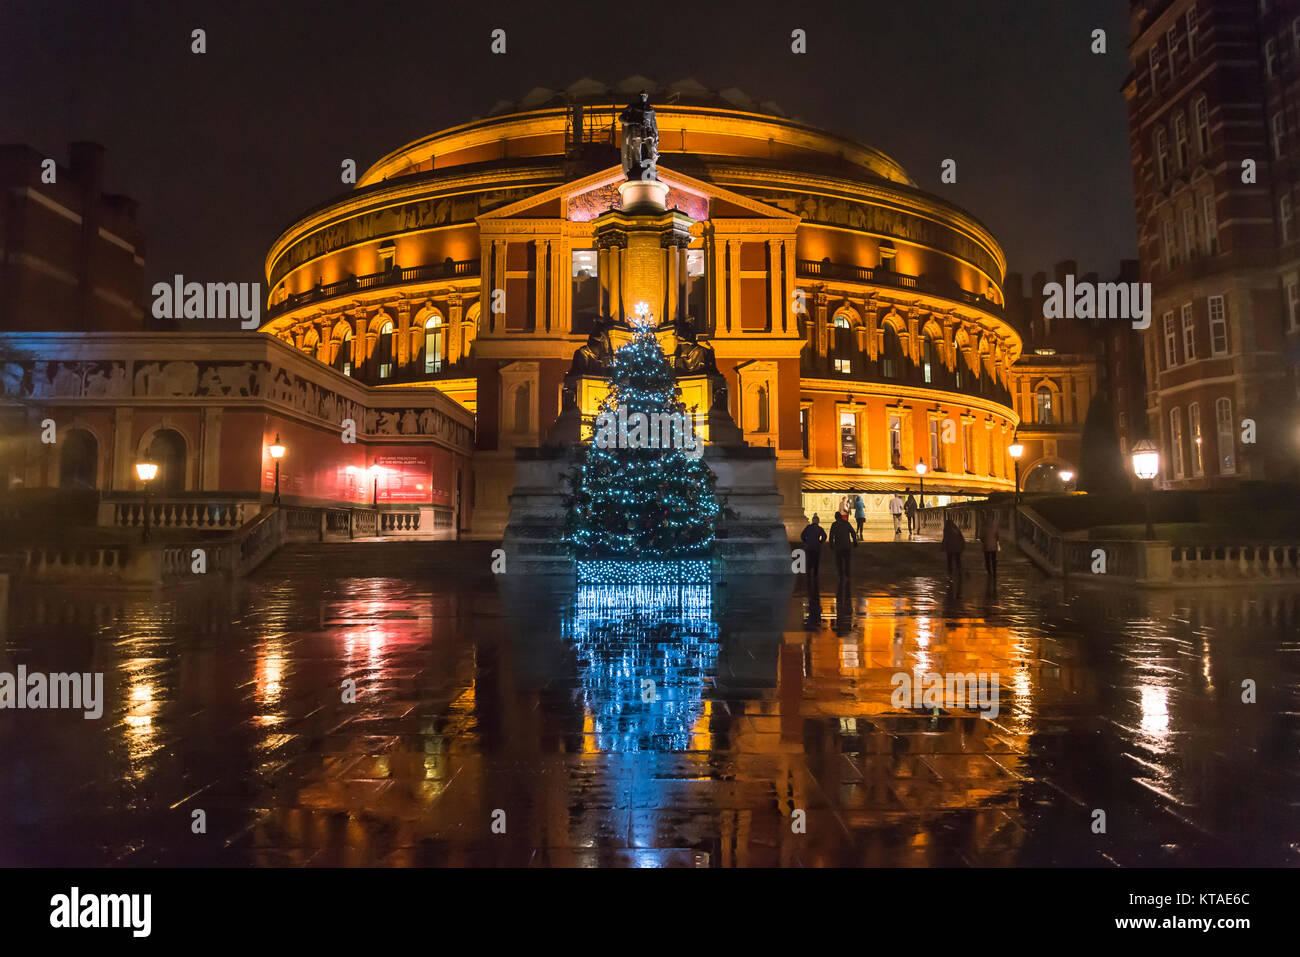 Christmas tree in front of the Royal Albert Hall at night, South Kensington, London, England, UK Stock Photo